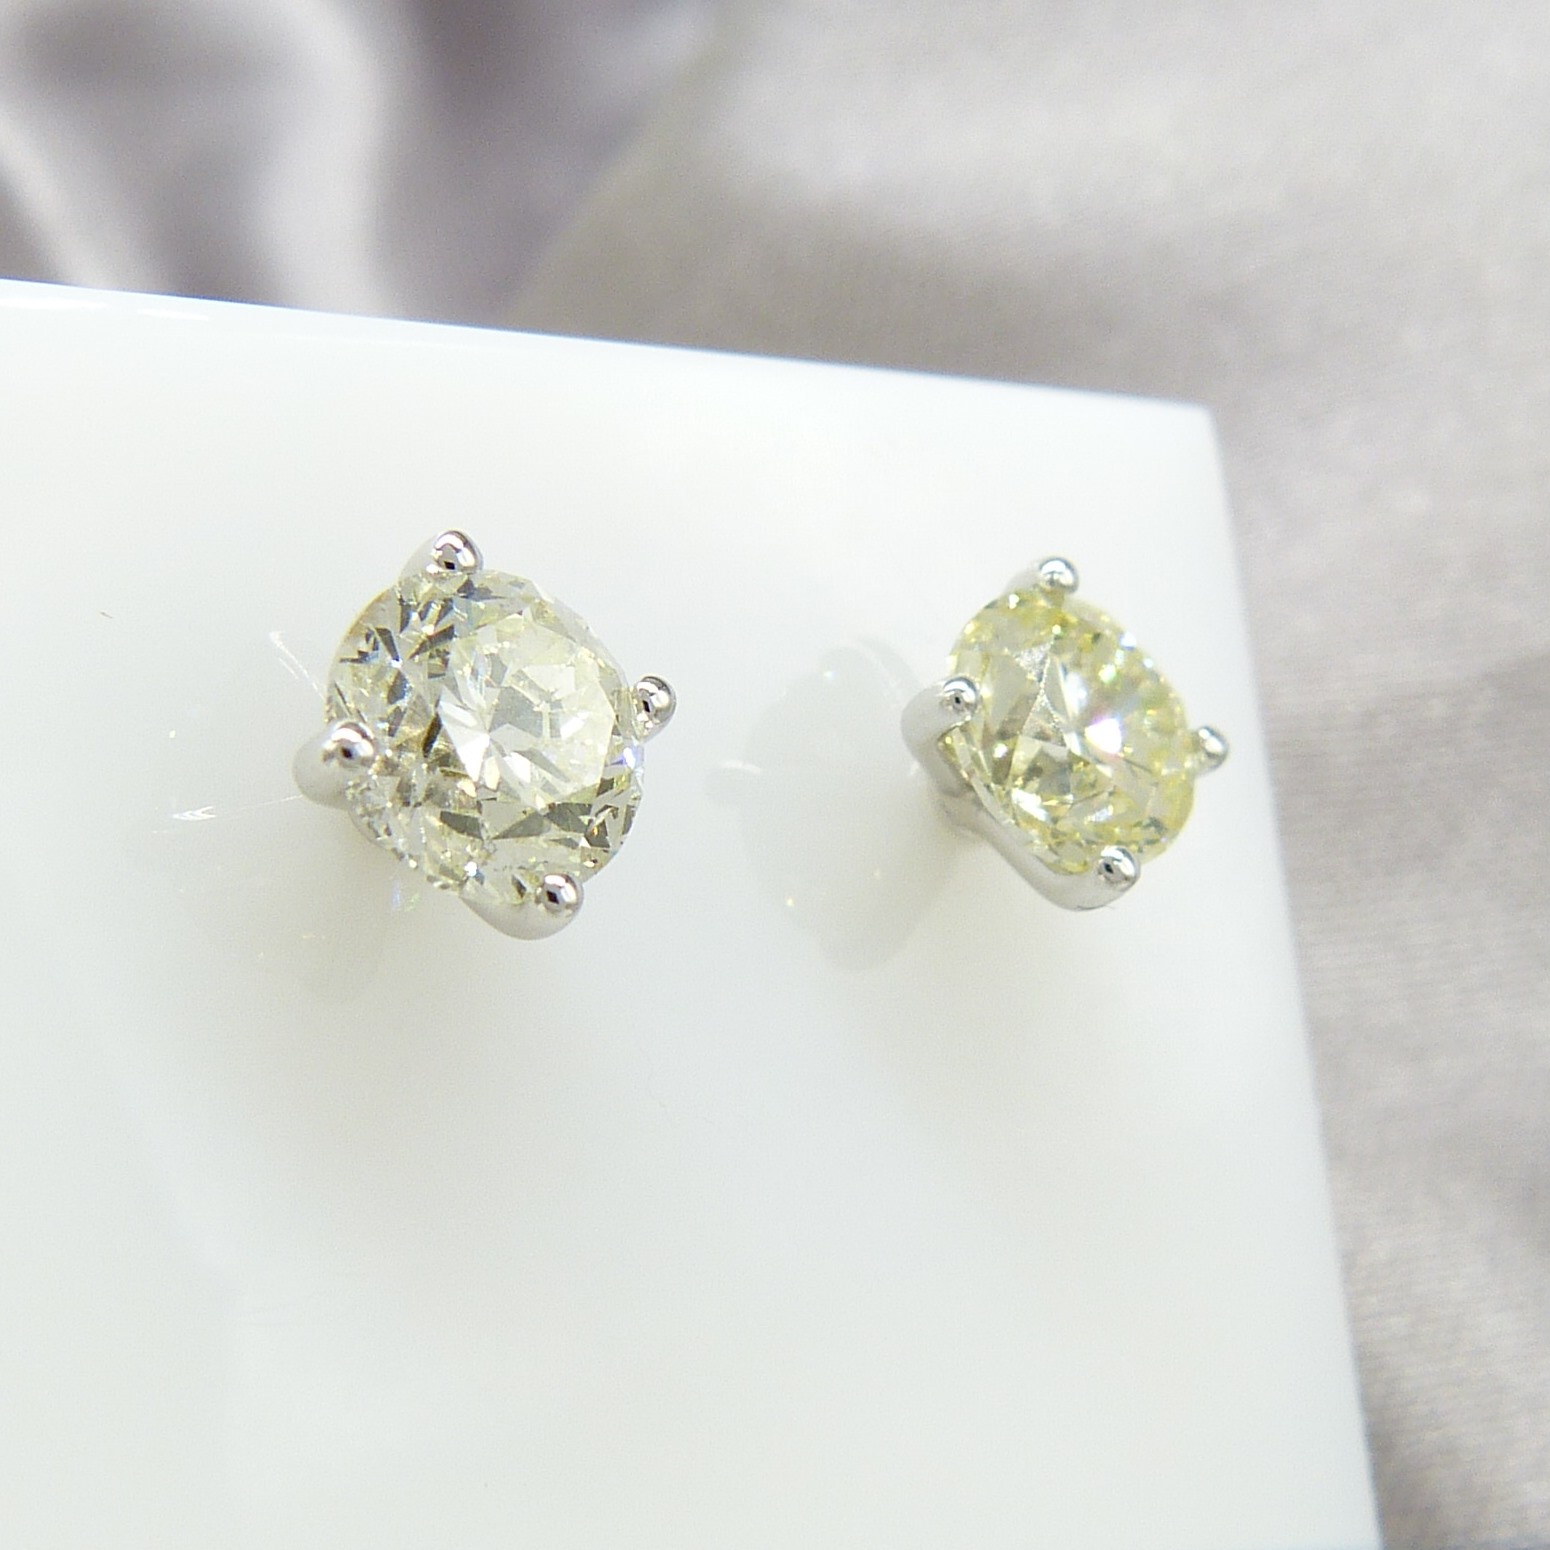 1.32 Carat Diamond Stud Earrings In 18ct White Gold, Certificated and Boxed - Image 3 of 8